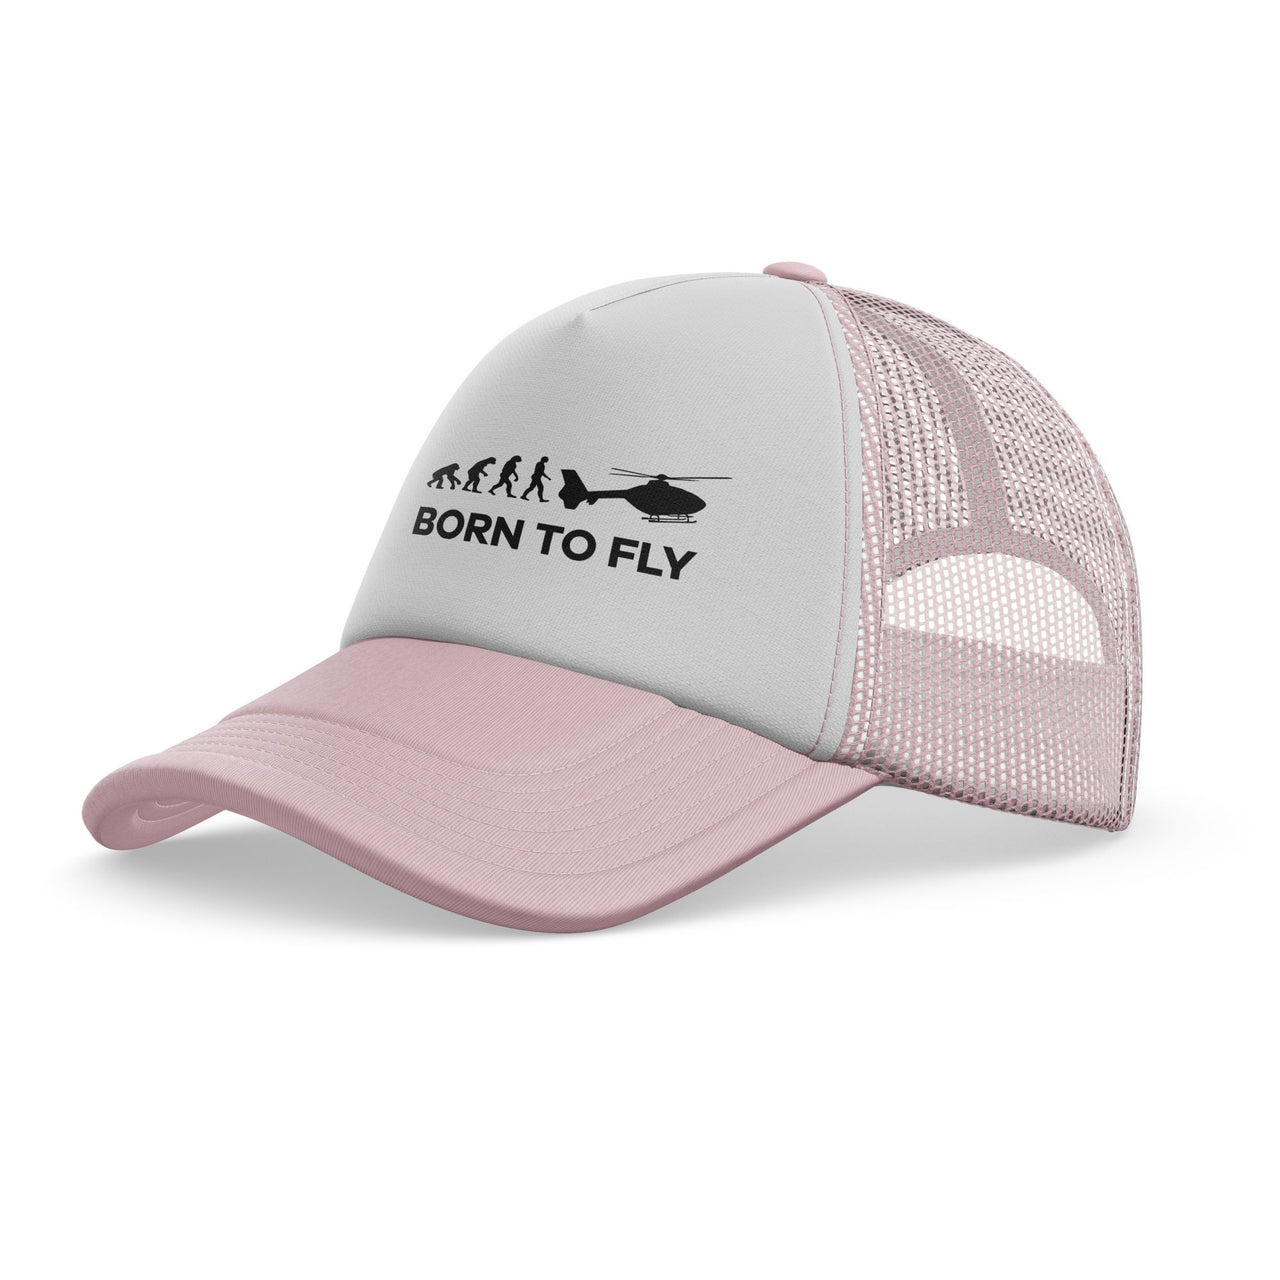 Born To Fly Helicopter Designed Trucker Caps & Hats